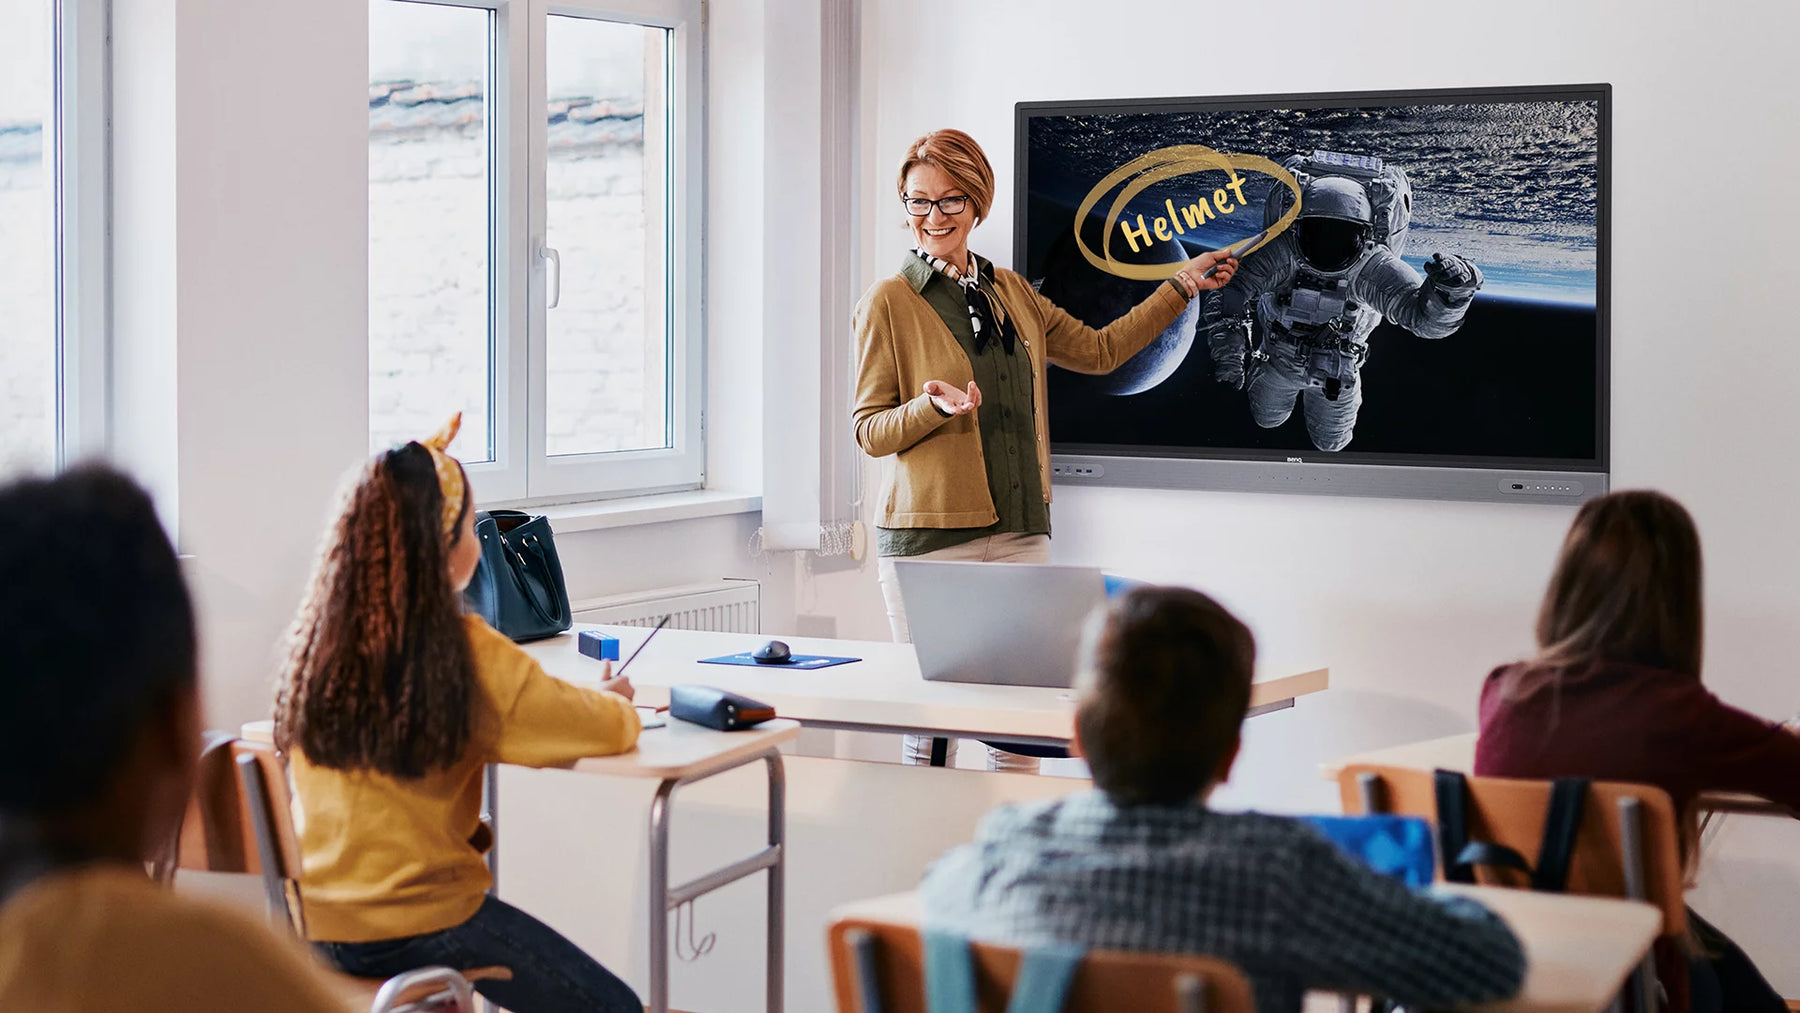 BenQ Master Series 86" Interactive Whiteboard for Education. Give lessons and manage classes the way you’re used to with the BenQ Board Master. 